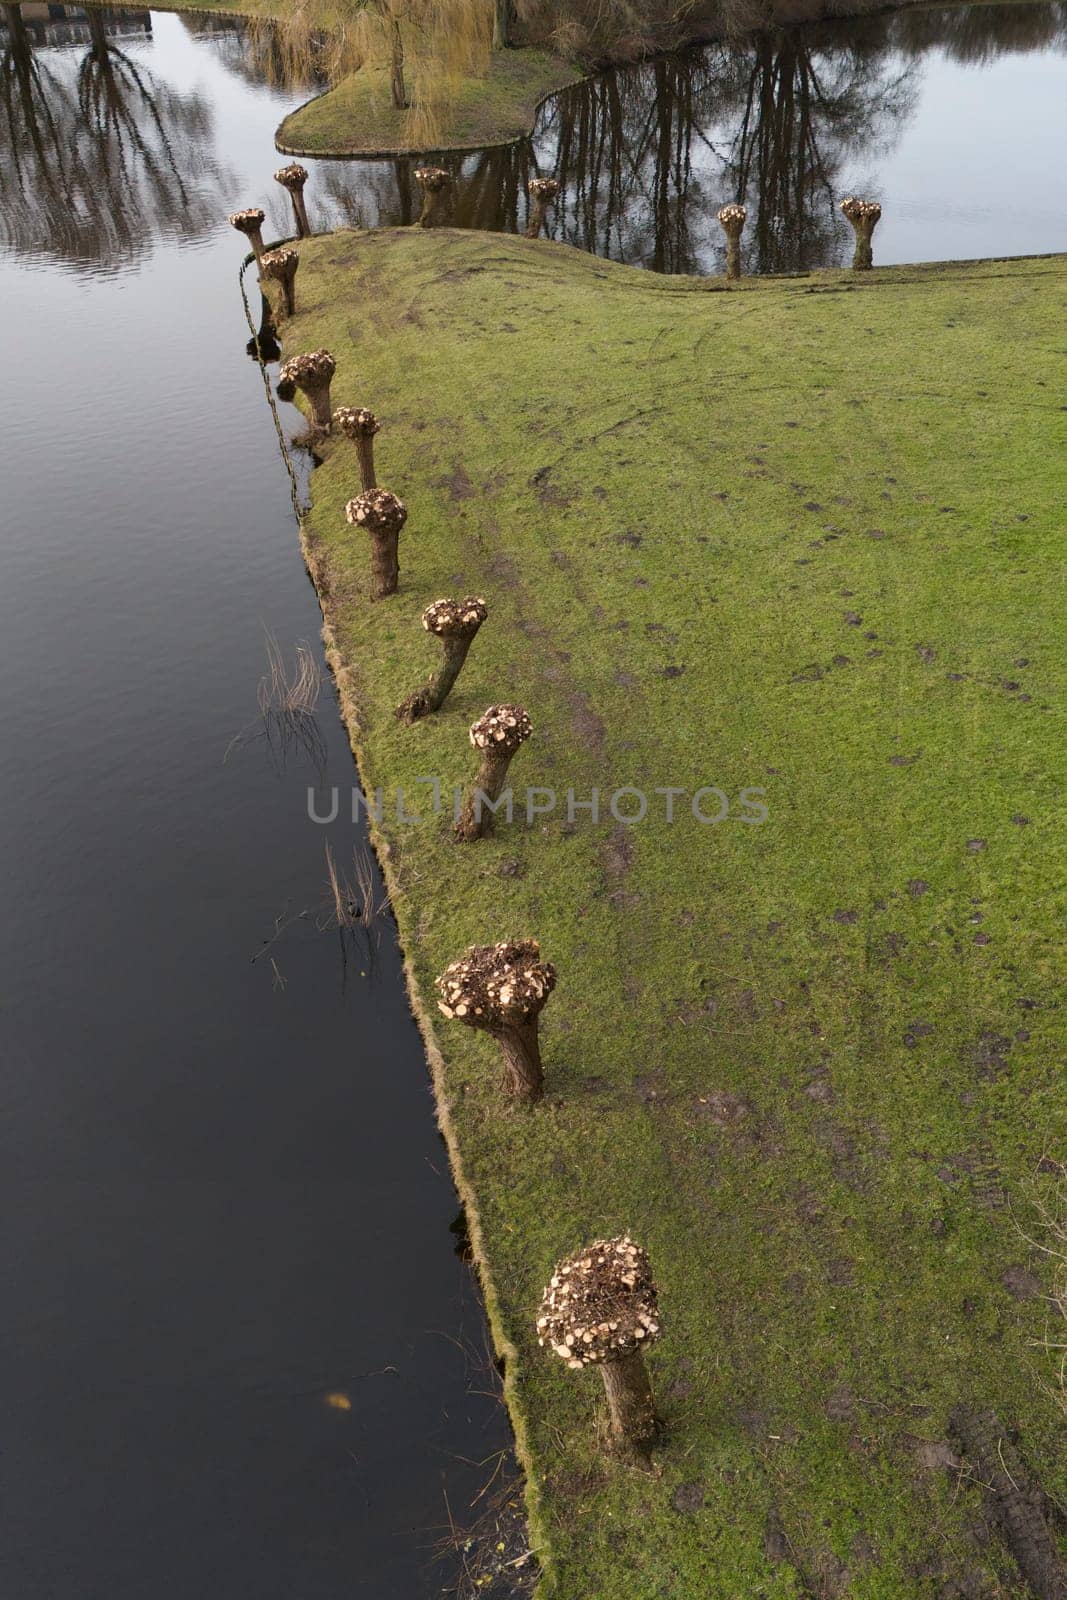 pruned pollard willows in February on a green lawn by the water, aerial photo taken with a drone and vertically